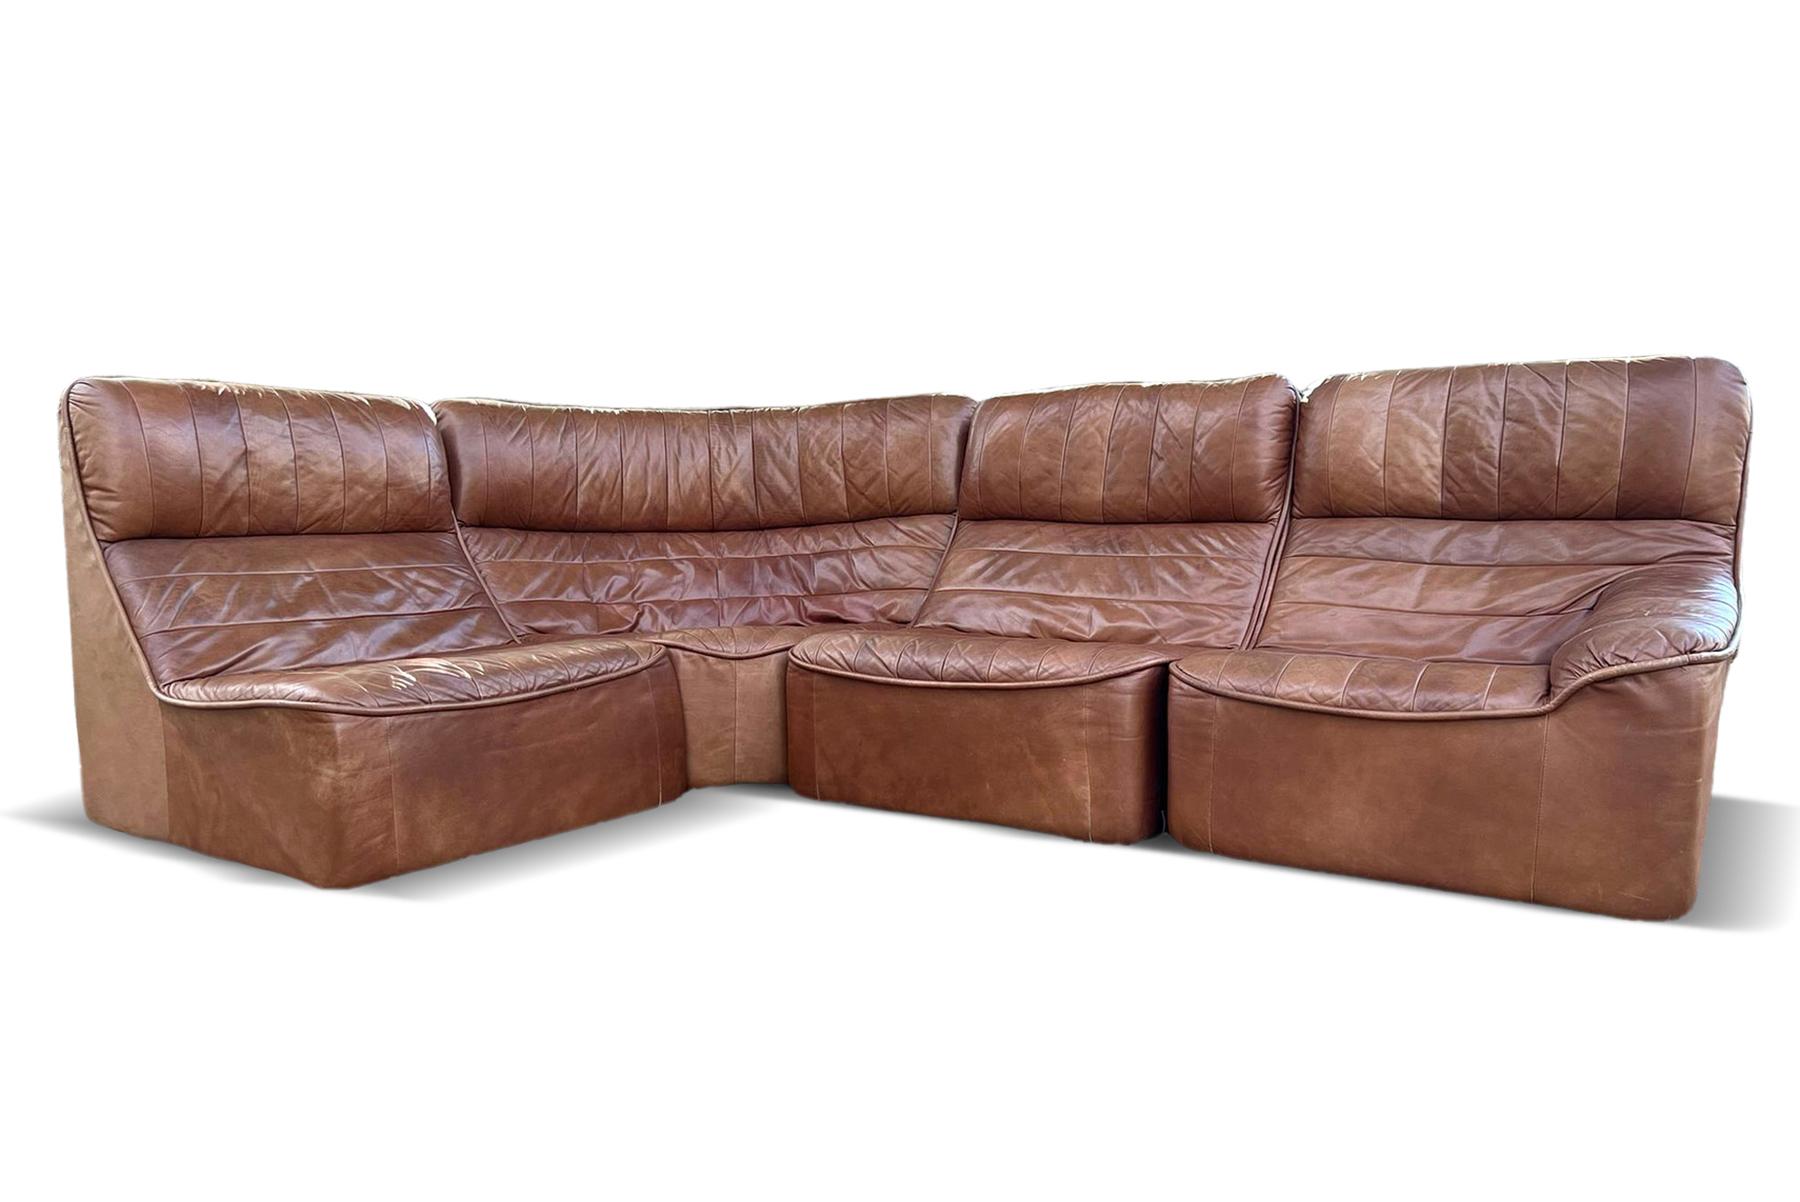 1970s Modular Leather Sofa in Cognac Leather For Sale 1